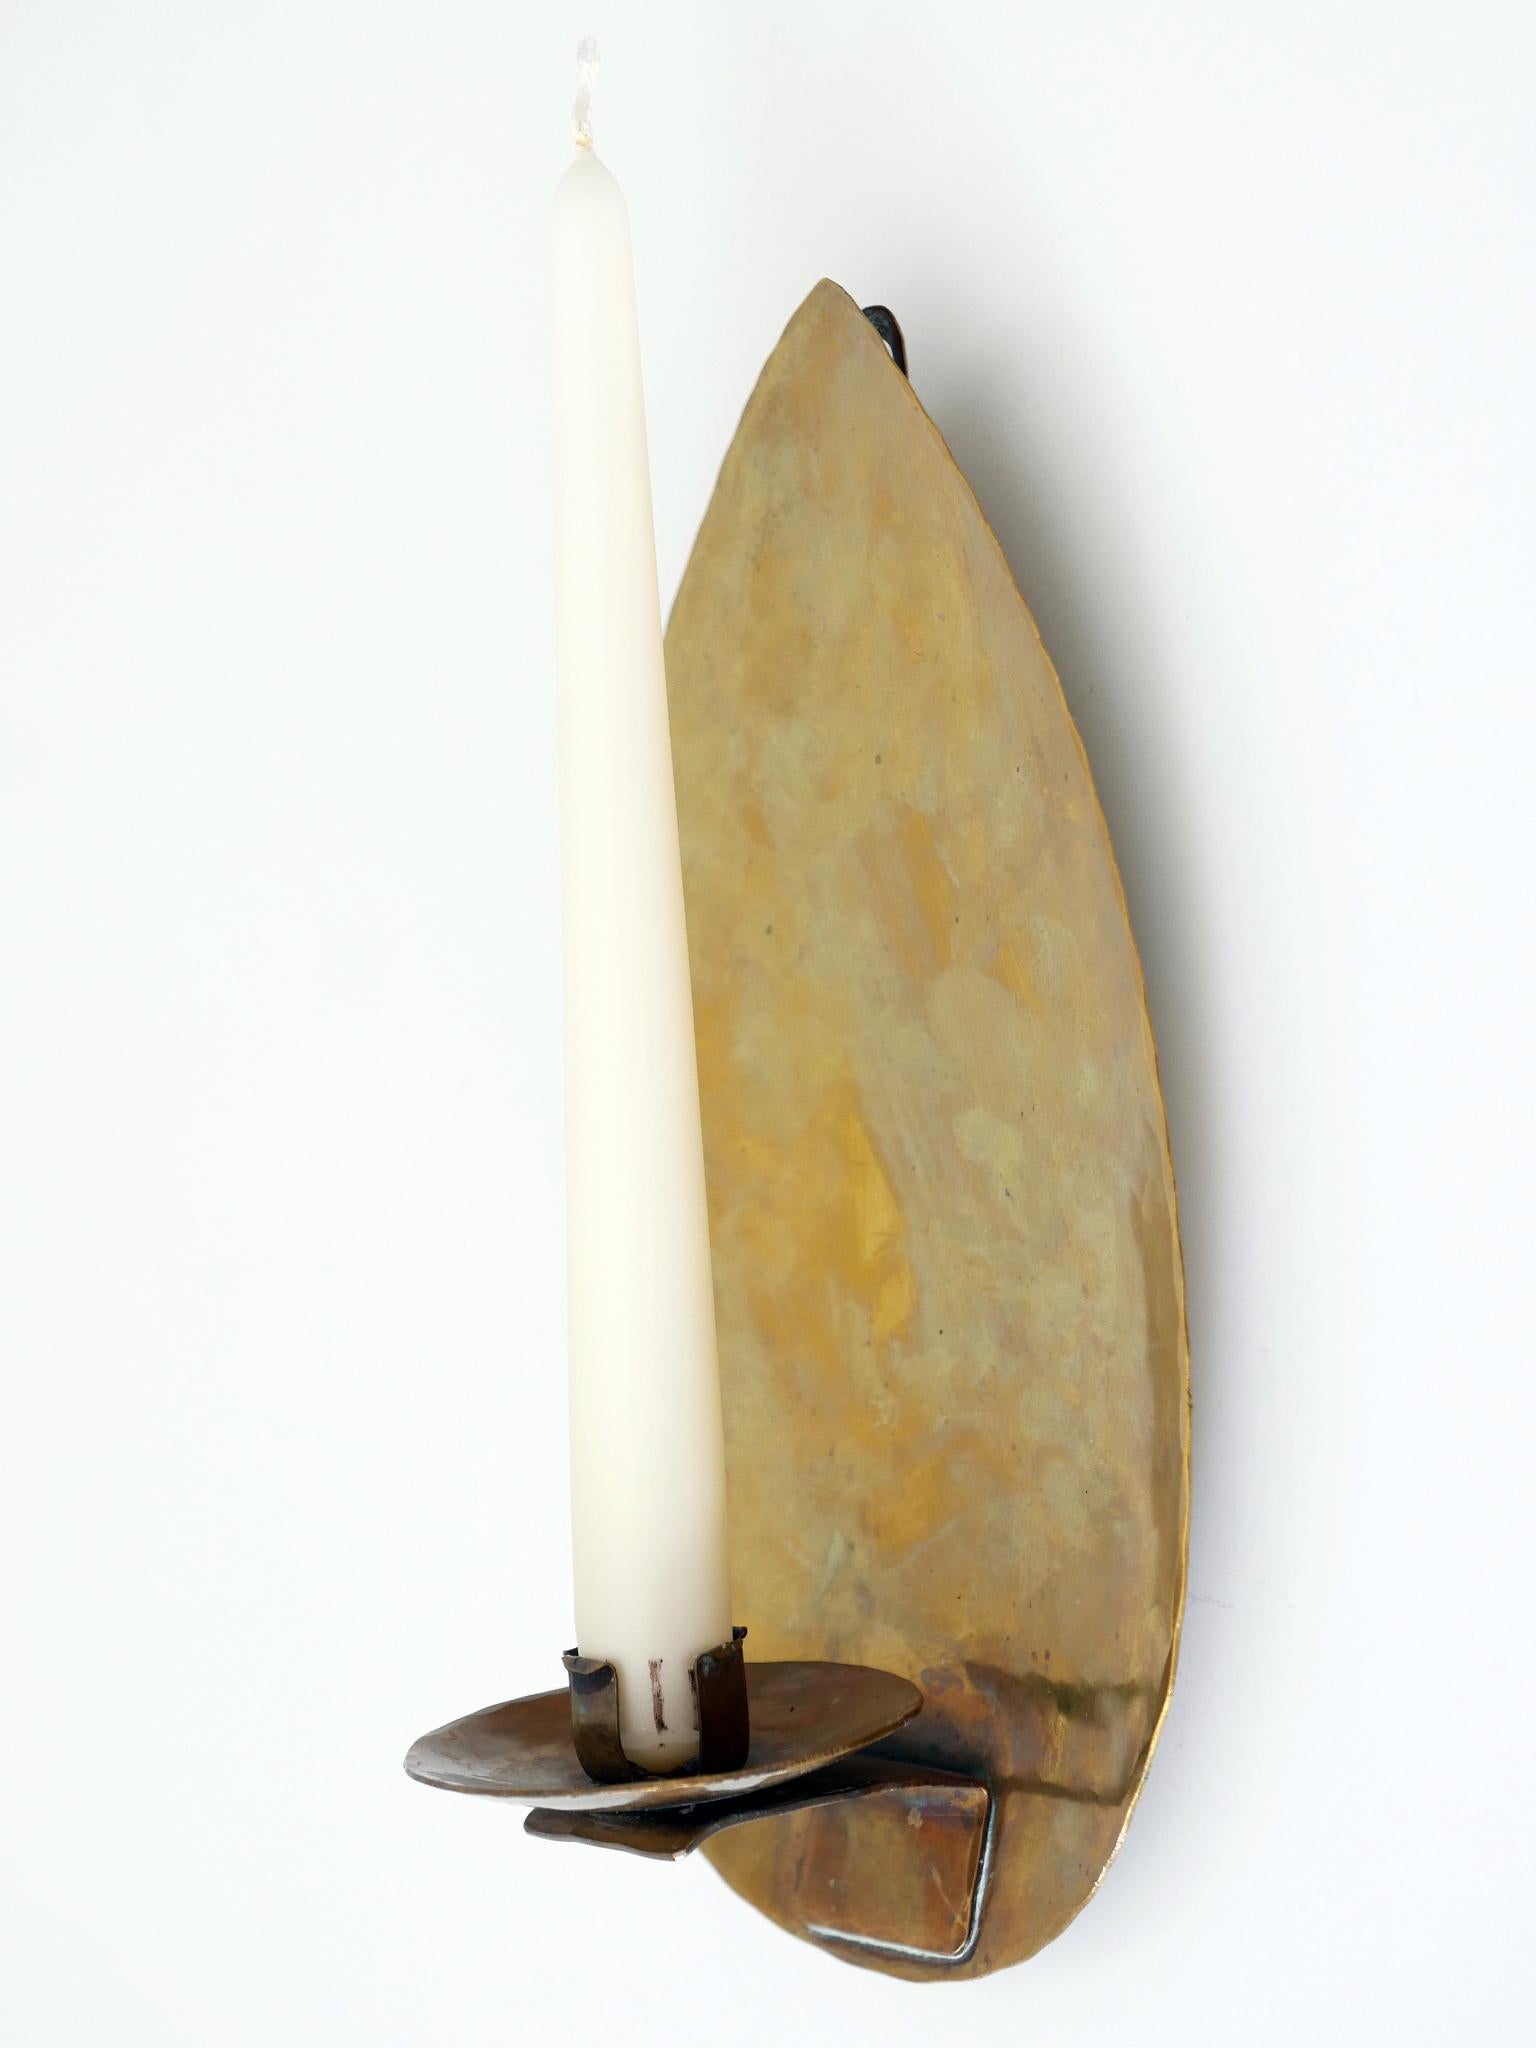 Elegant Hammered Brass Bauhaus Candle Sconce 1930s Germany For Sale 4